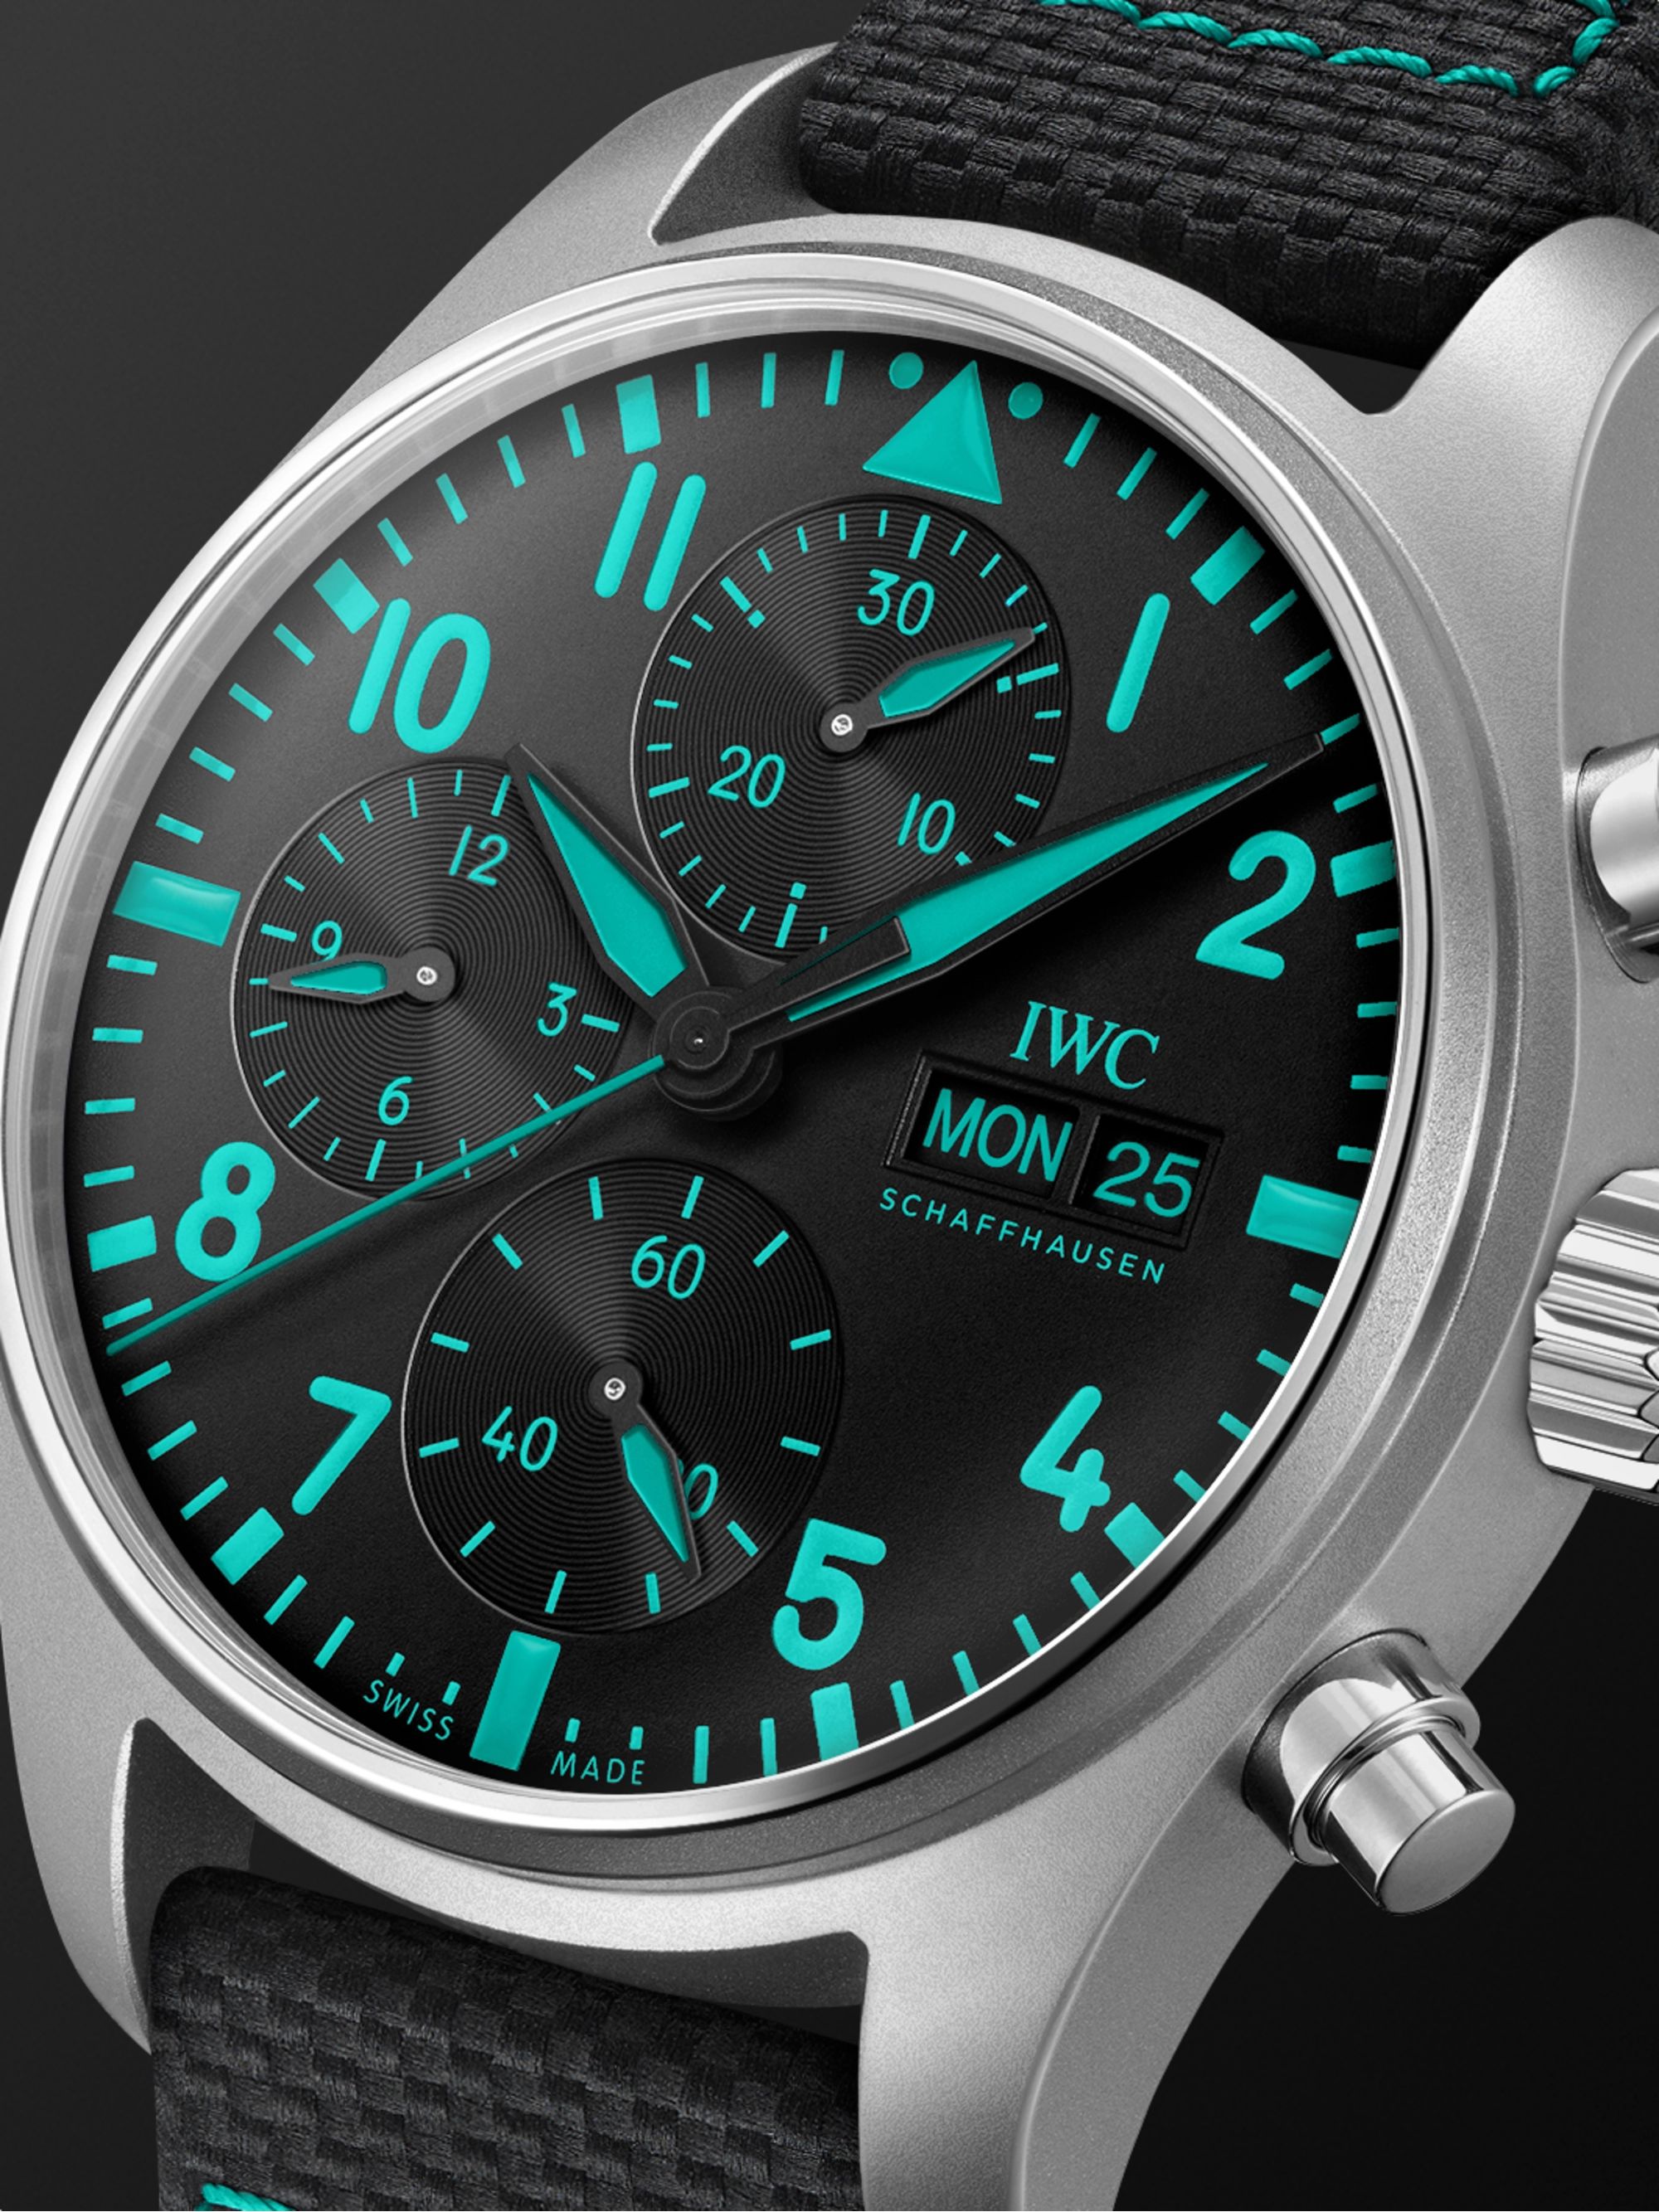 IWC SCHAFFHAUSEN Pilot's Watch Mercedes-AMG Petronas Formula One™ Team Edition Automatic Chronograph 41mm Titanium and Leather Watch, Ref. No. IWIW388108